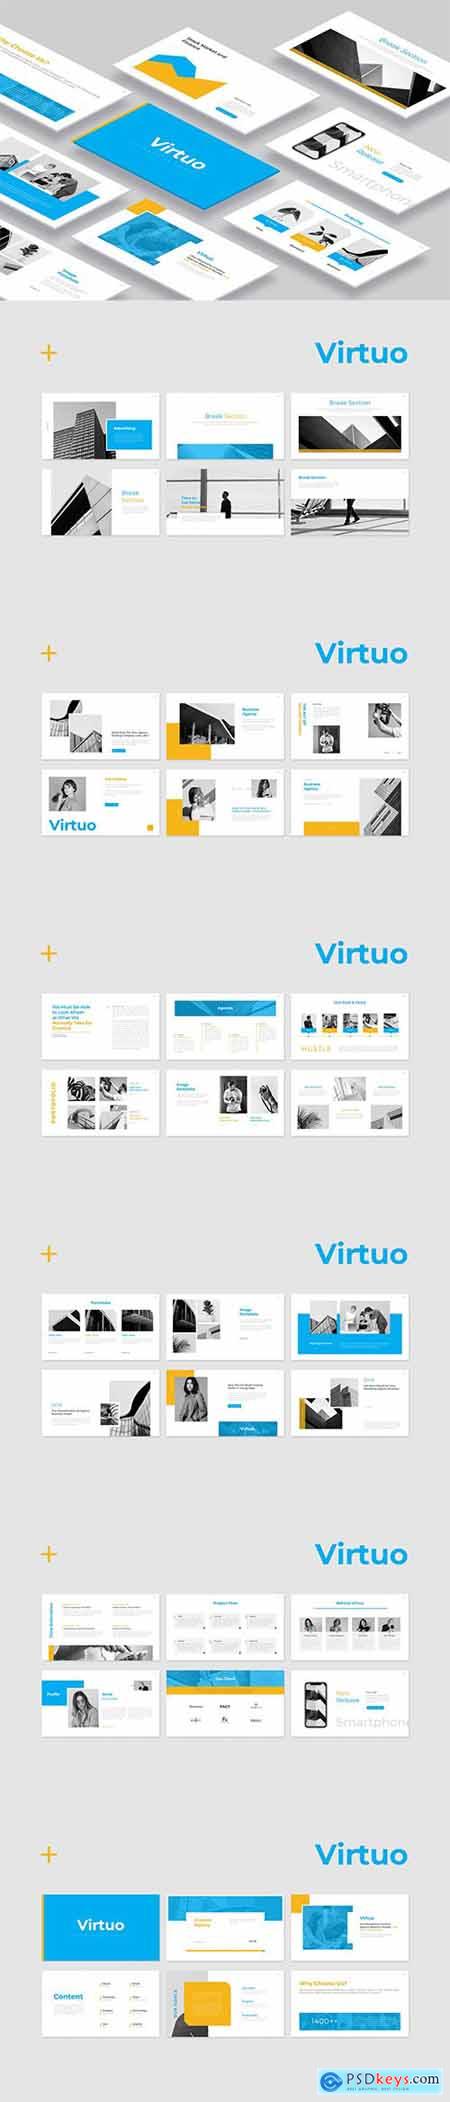 Virtuo Powerpoint and Keynote